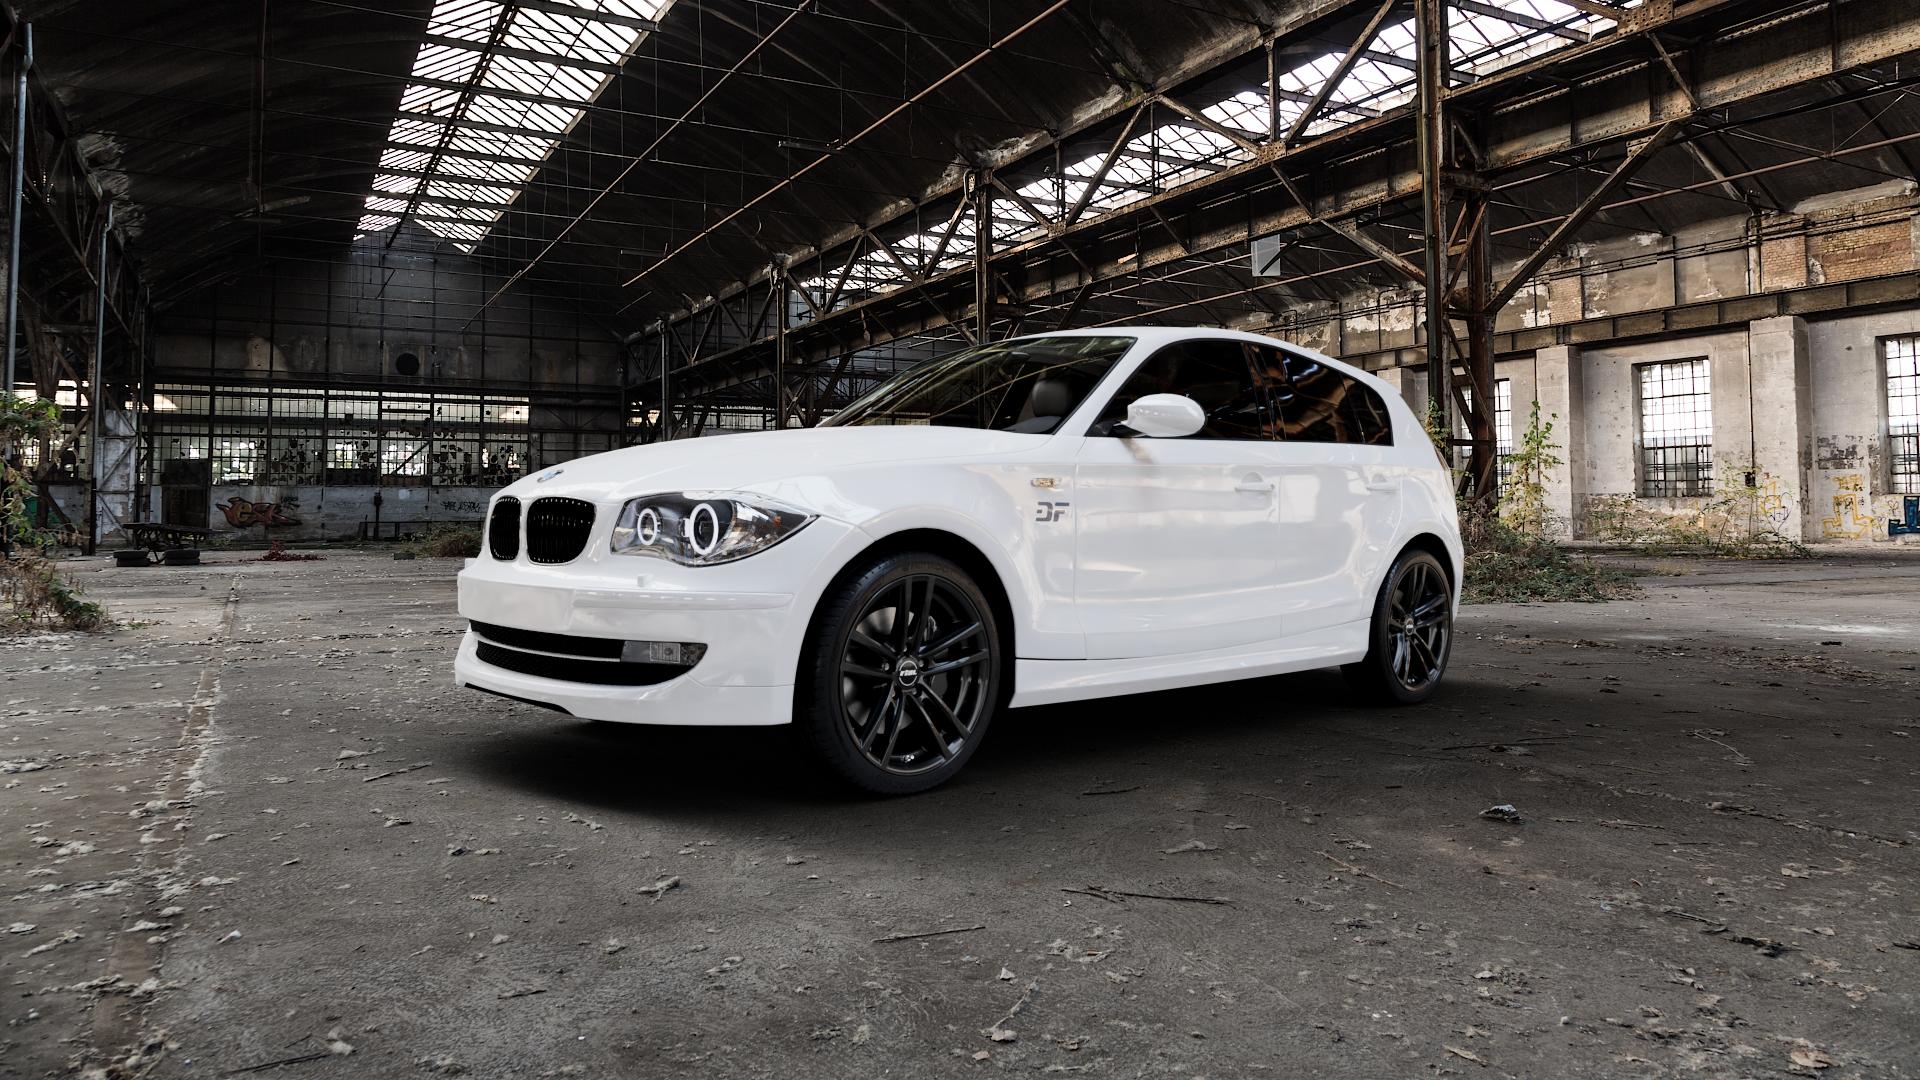 BMW 116d Type E87 2,0l D 85kW (116 hp) Wheels and Tyre Packages |  velonity.com